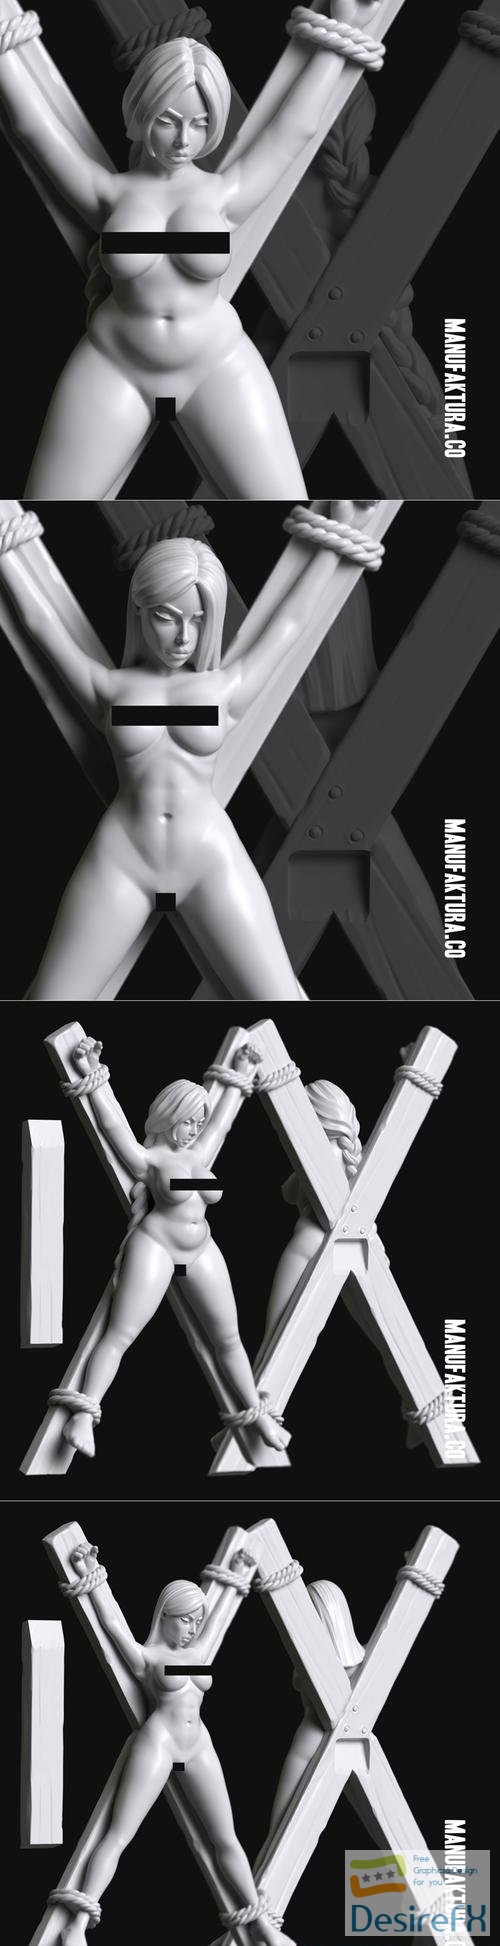 Sub Series 51-54 - Naked and Crucified Female Prisoner Slave – 3D Print